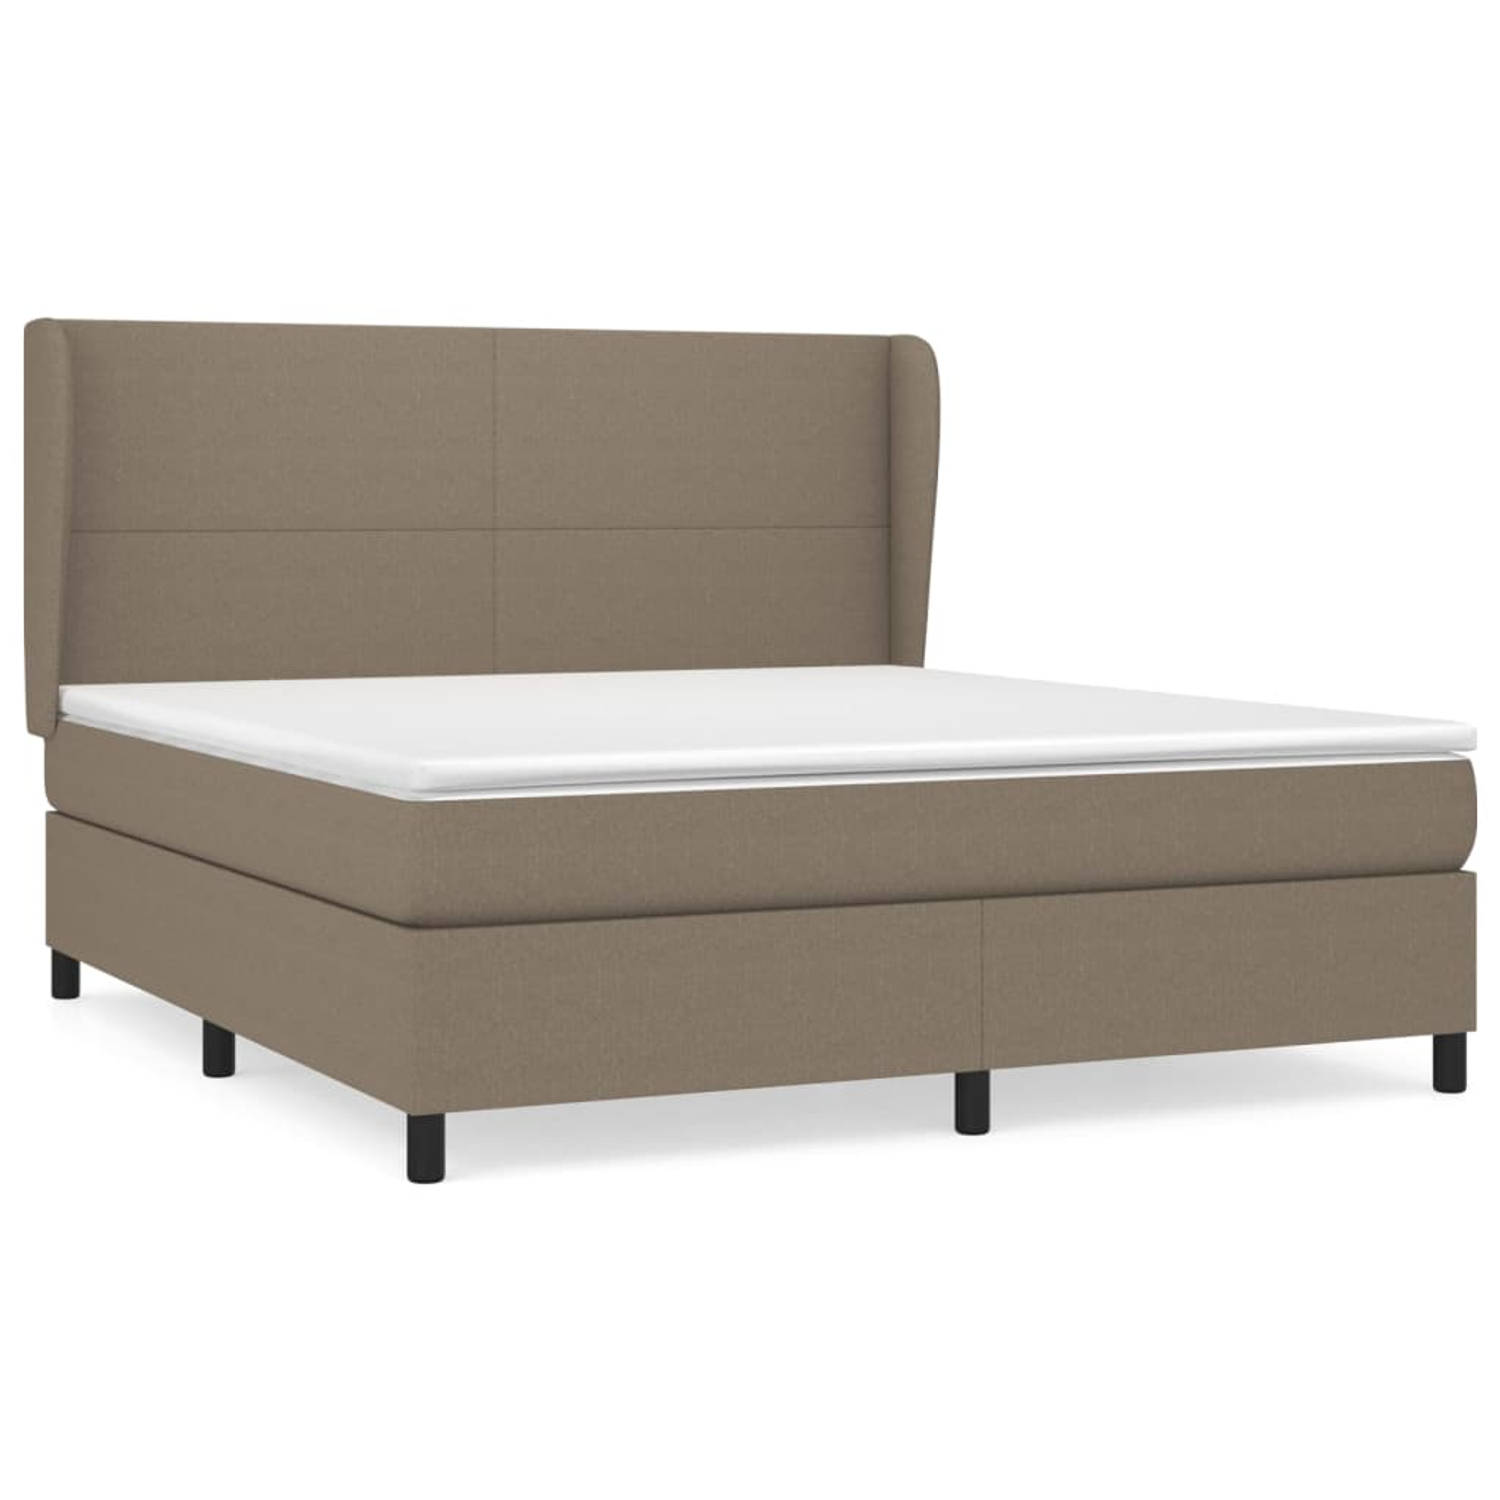 The Living Store Boxspringbed - Comfort Maximaal - 180 x 200 cm - Taupe(- The Living Store)